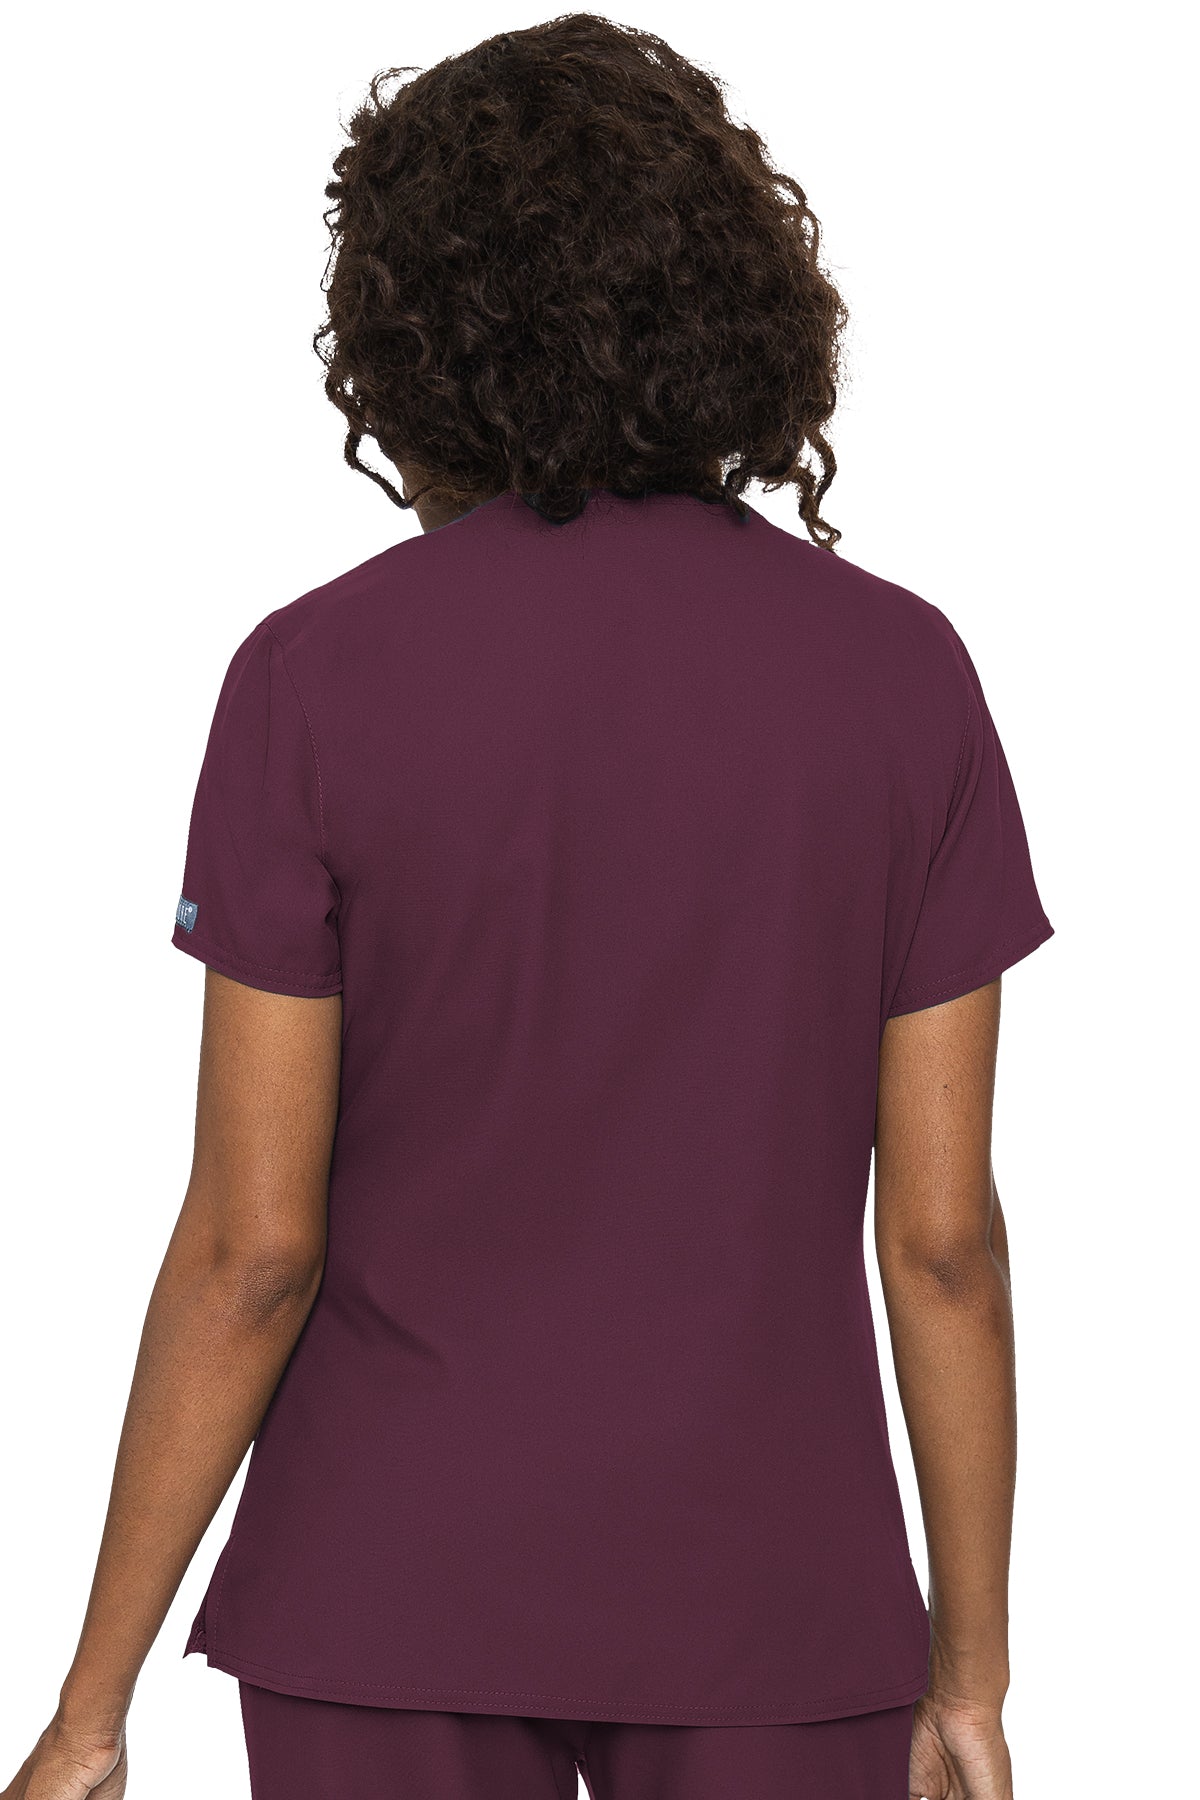 Med Couture 2468 Insight Women's V-Neck Top – Valley West Uniforms